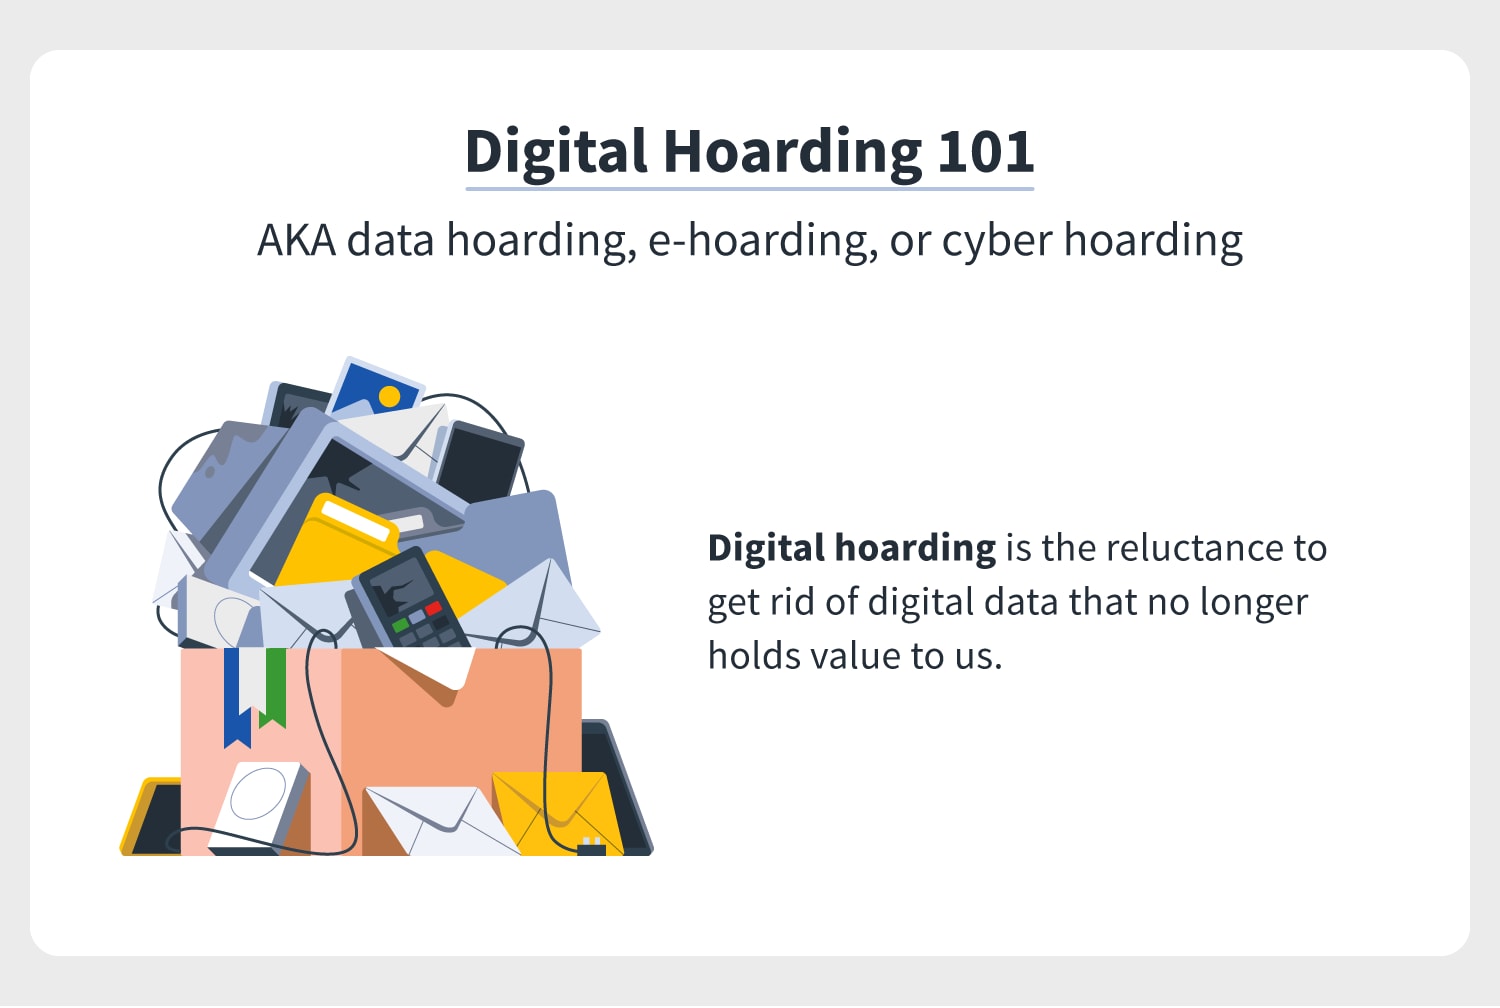 a definition of digital hoarding, which is also called data hoarding, e-hoarding, or cyber hoarding